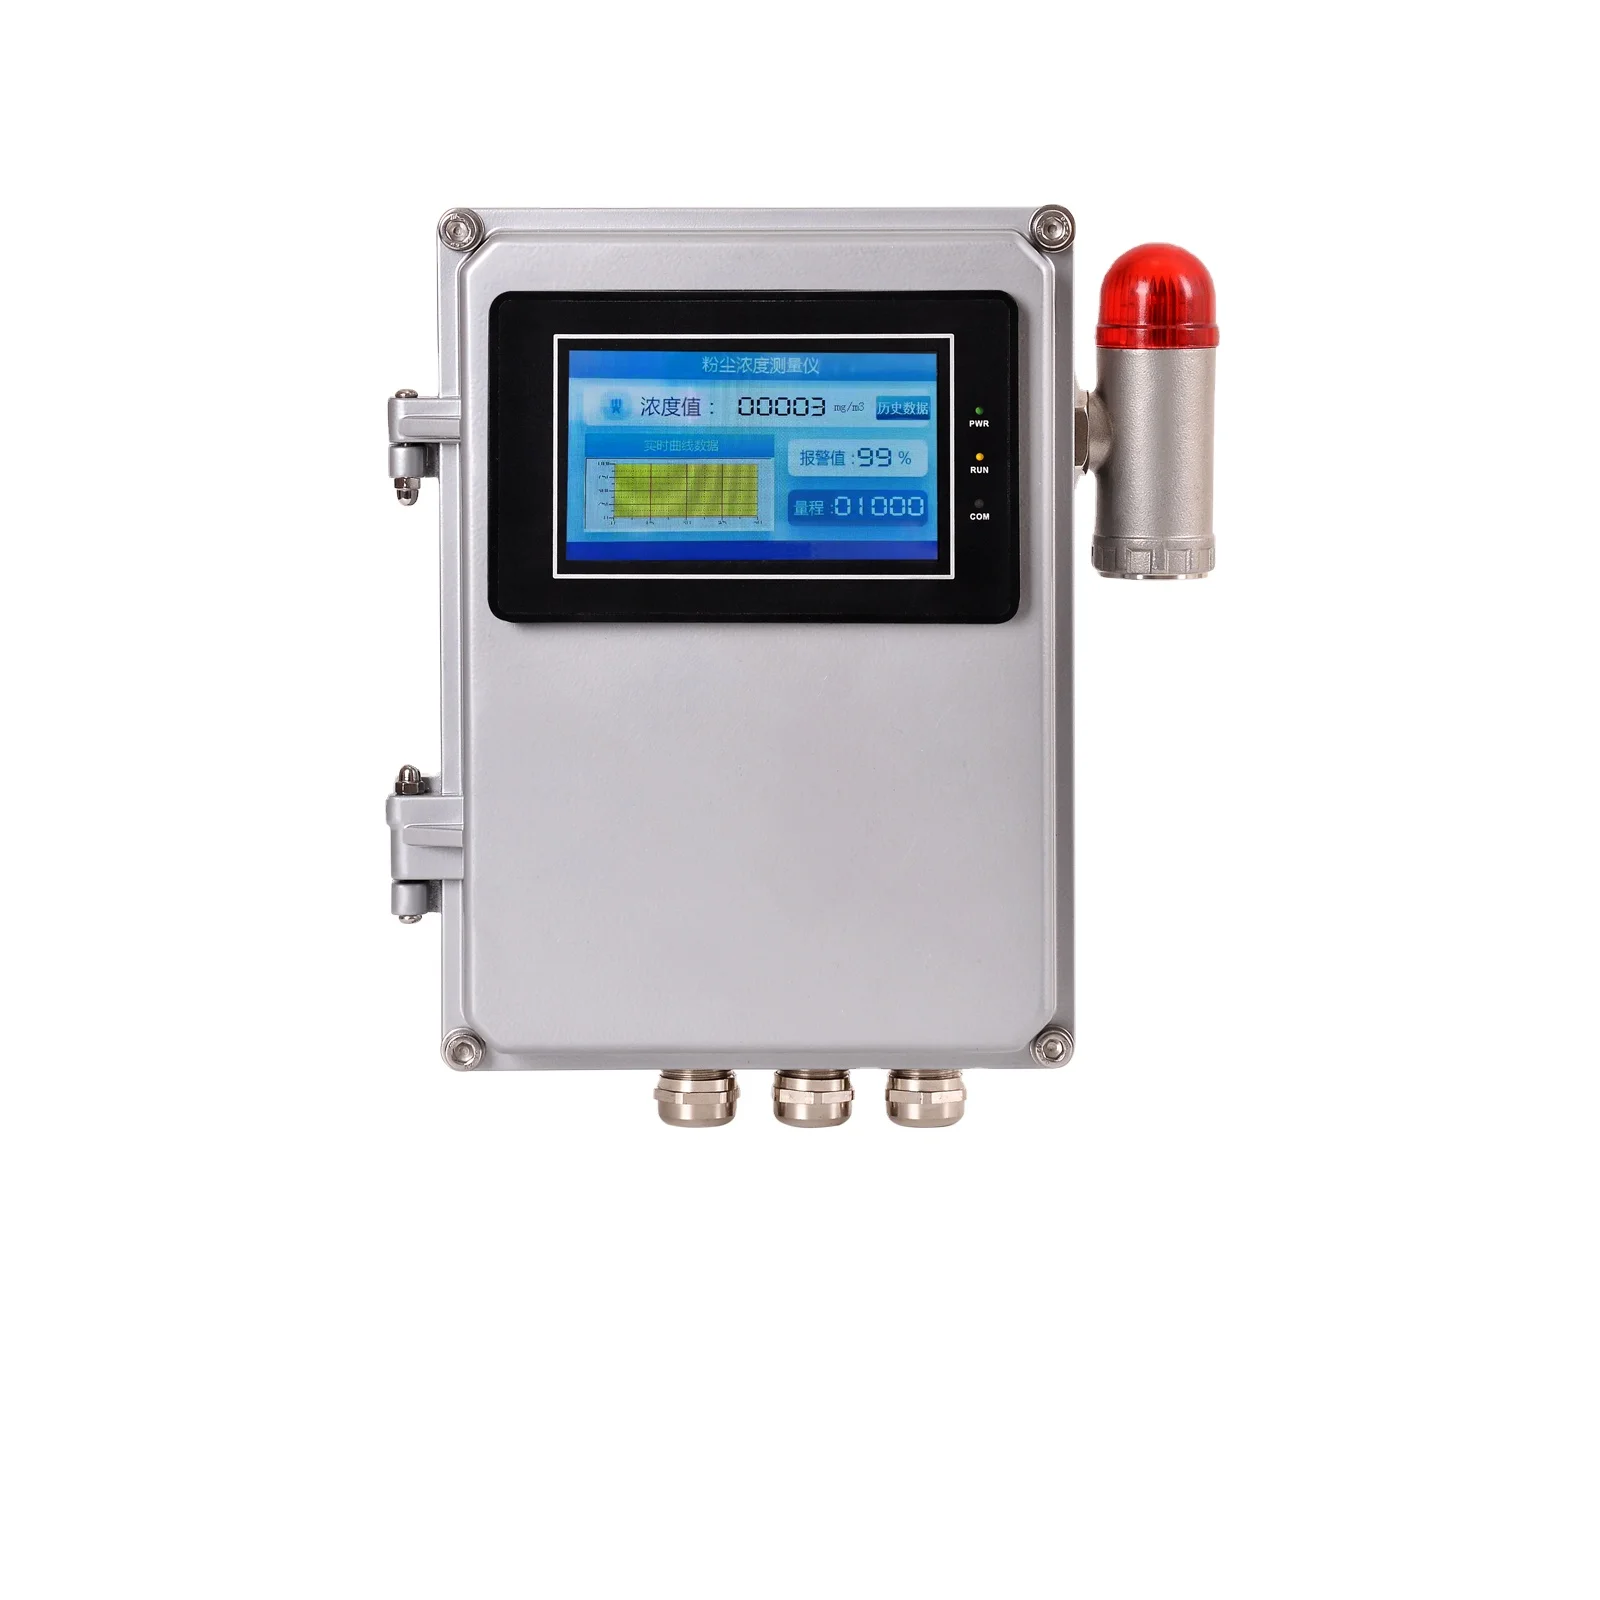 Product real-time online detection of dust particle quantity remote particle Counter